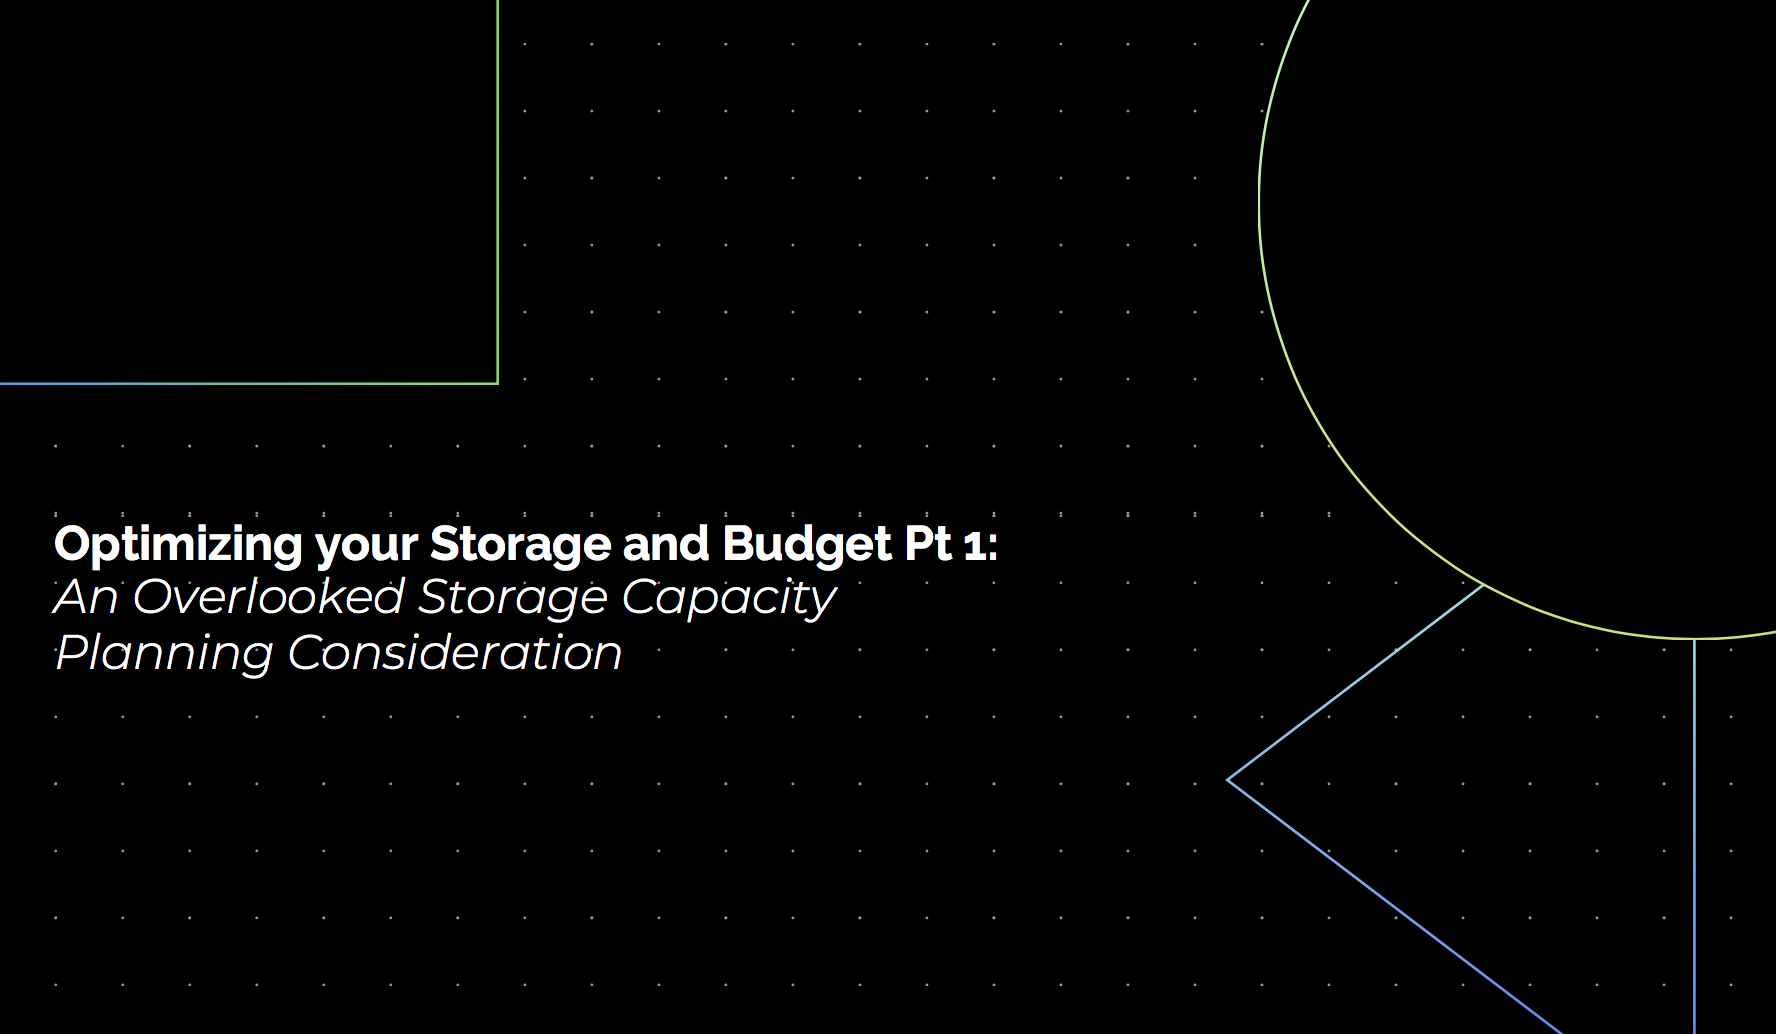 Optimizing your Storage and Budget Pt 1: An Overlooked Storage Capacity Planning Consideration